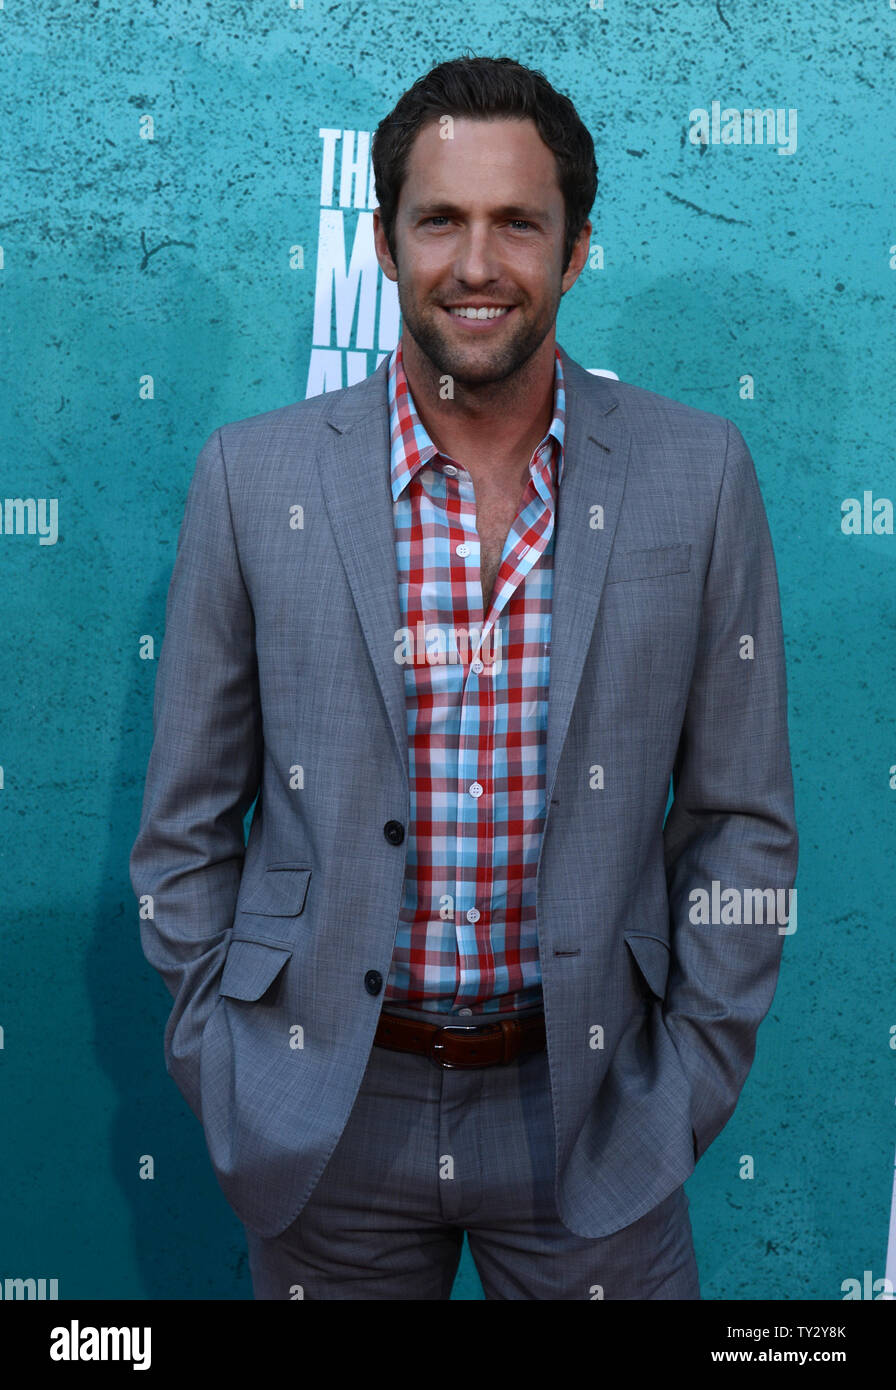 Actor Mike Faiola arrived at the MTV Movie Awards at the Gibson Amphitheatre in Universal City, California on June 3, 2012.  UPI/Jim Ruymen Stock Photo